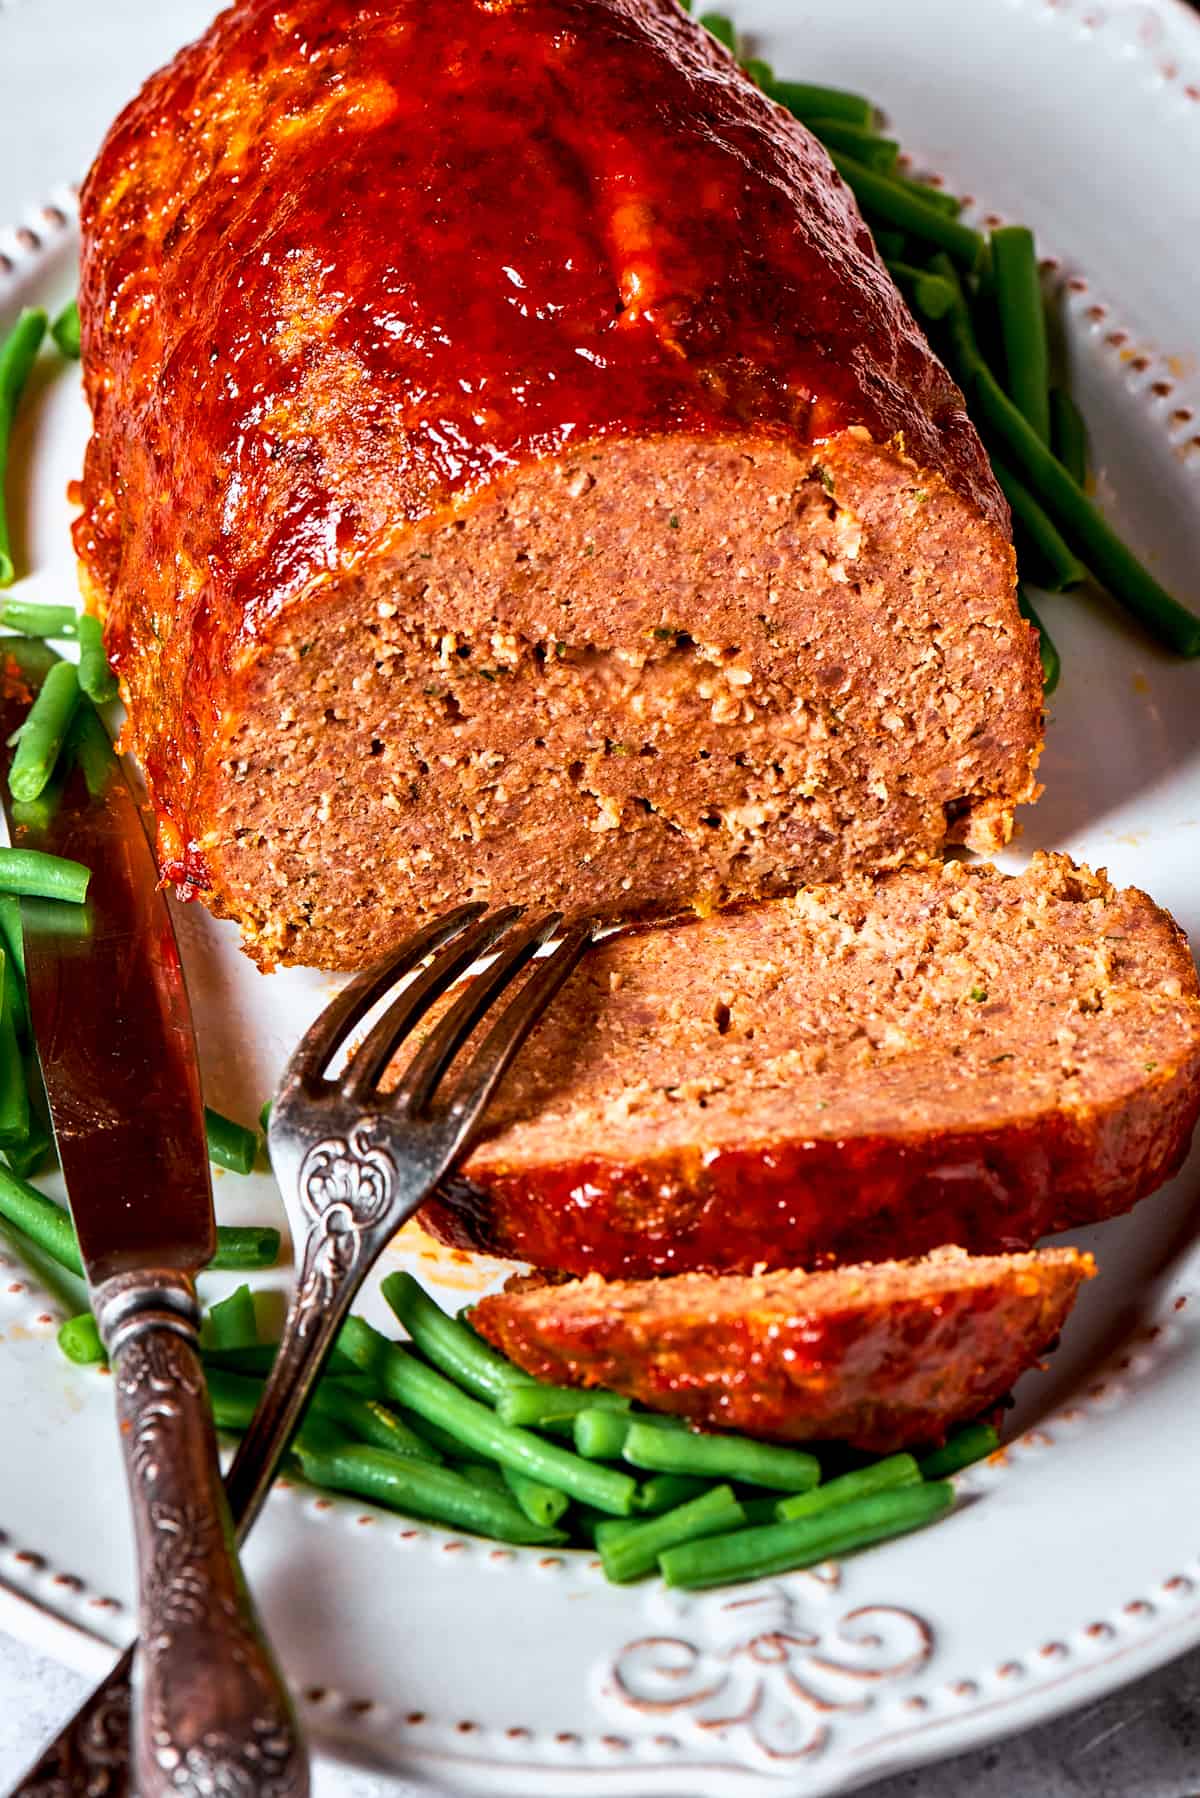 A side view of a sliced brown sugar meatloaf, exposing its texture.